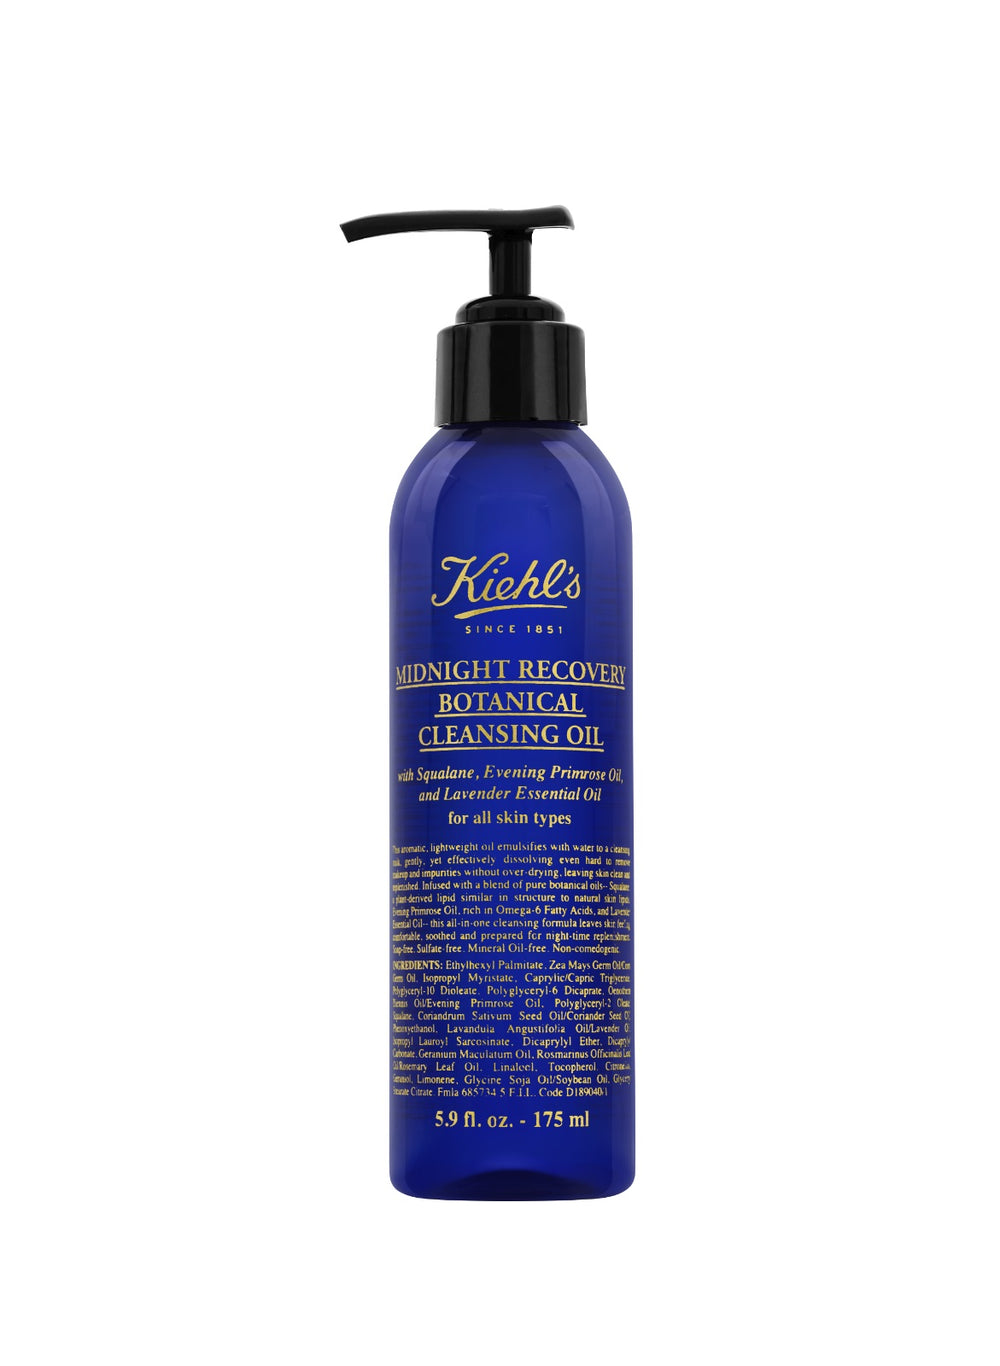 KIEHL'S MIDNIGHT RECOVERY CLEANSING OIL